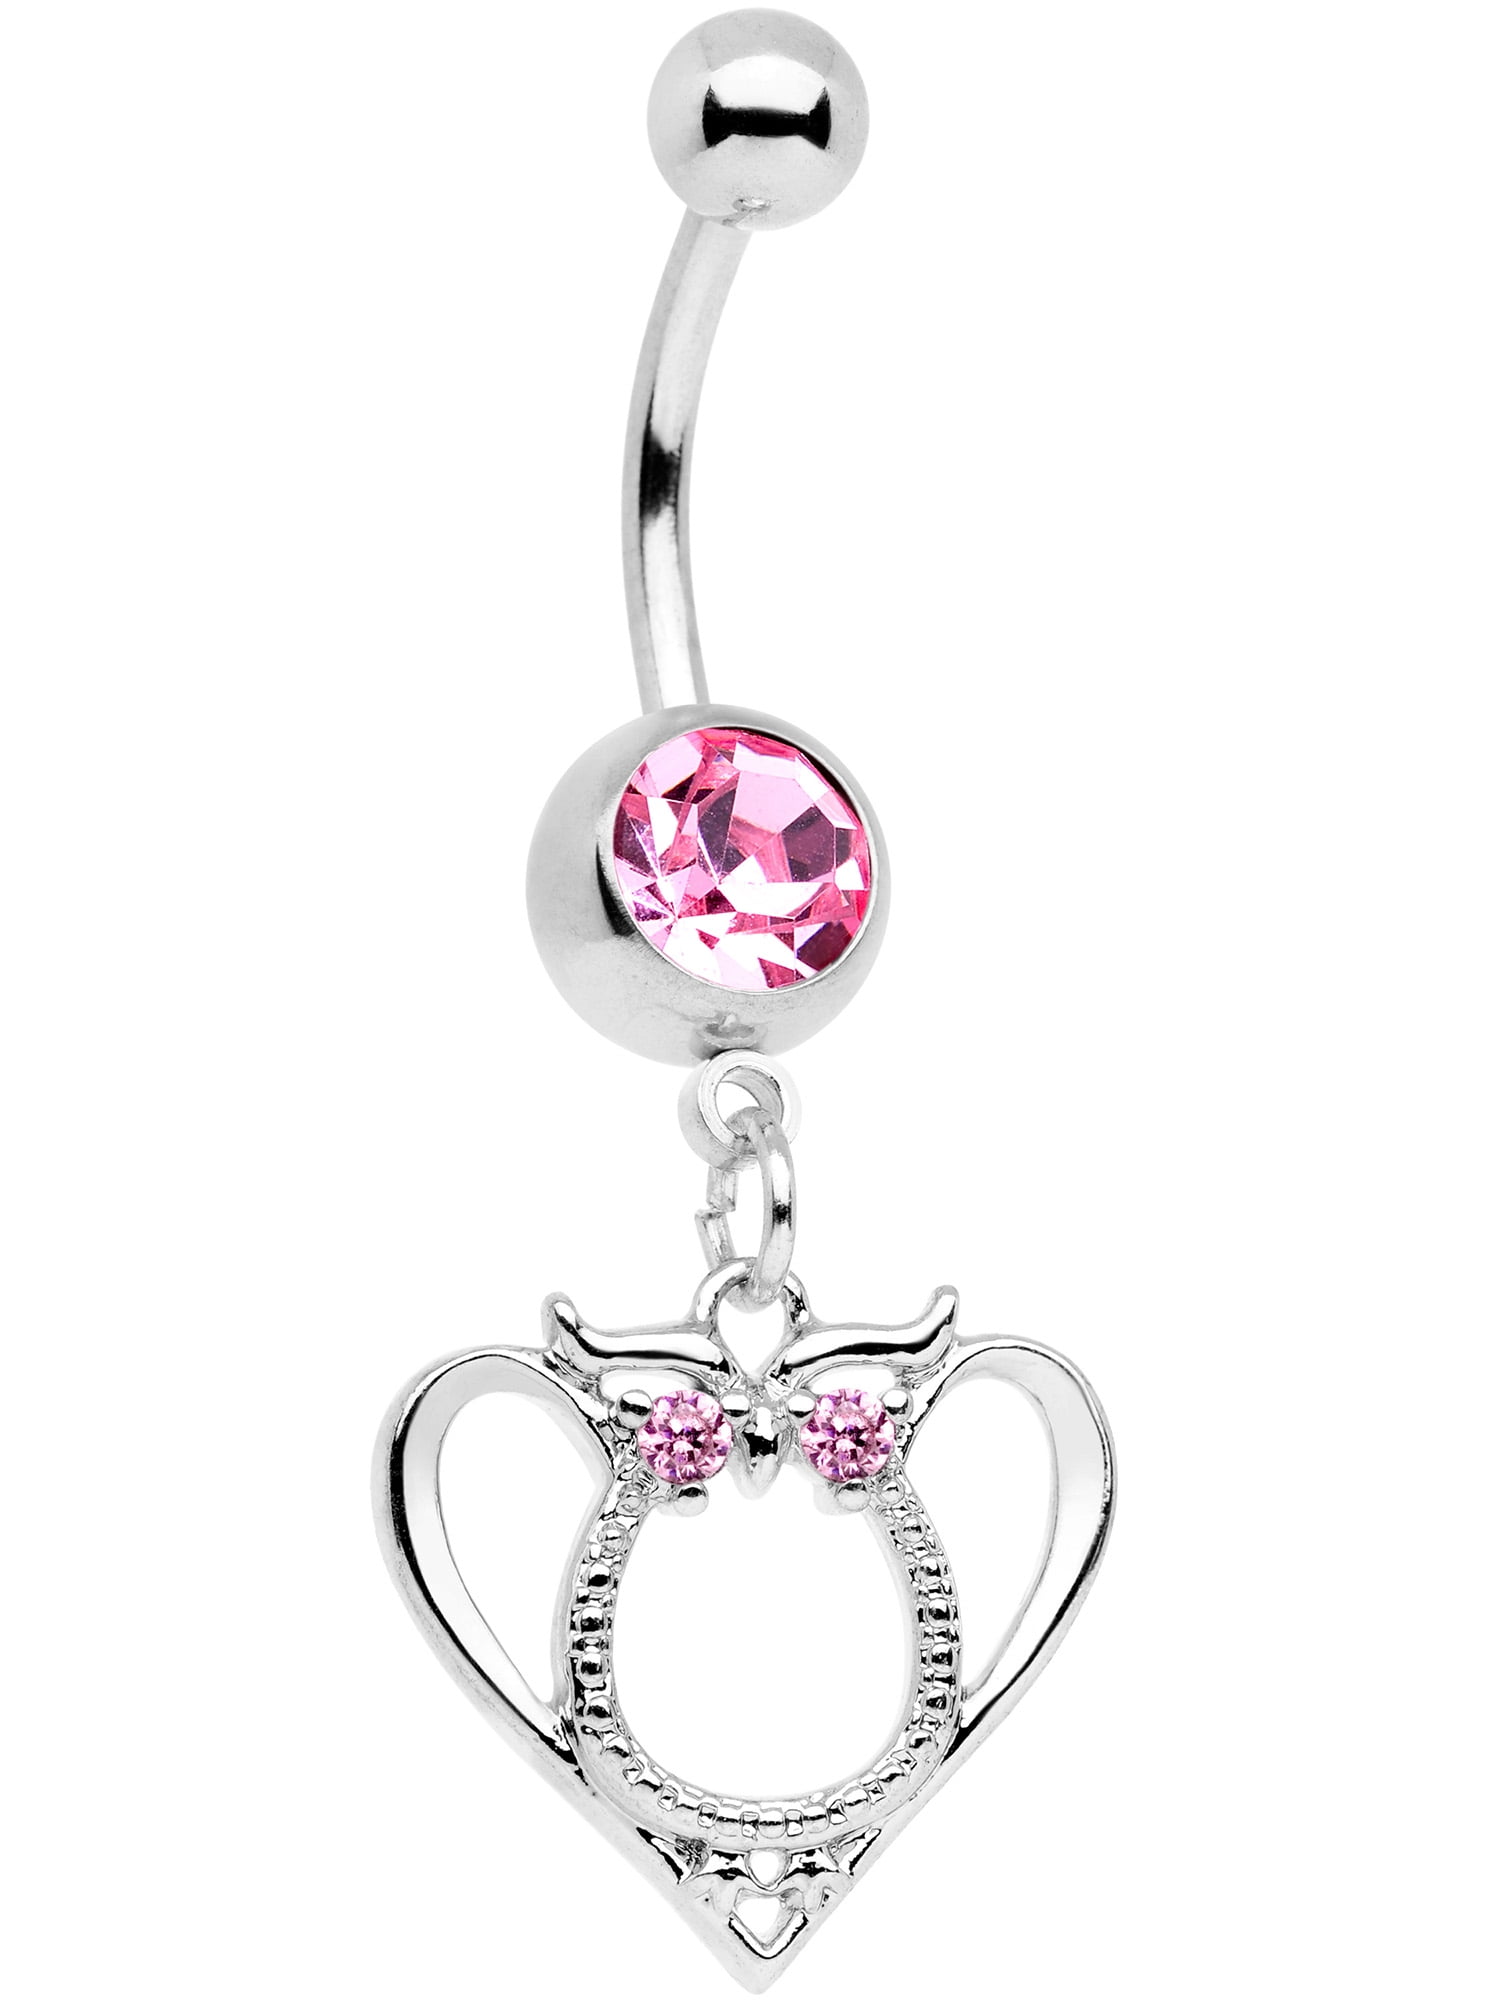 Stainless Steel Belly Ring With UV Acrylic Tribal Design in Assorted Colors 